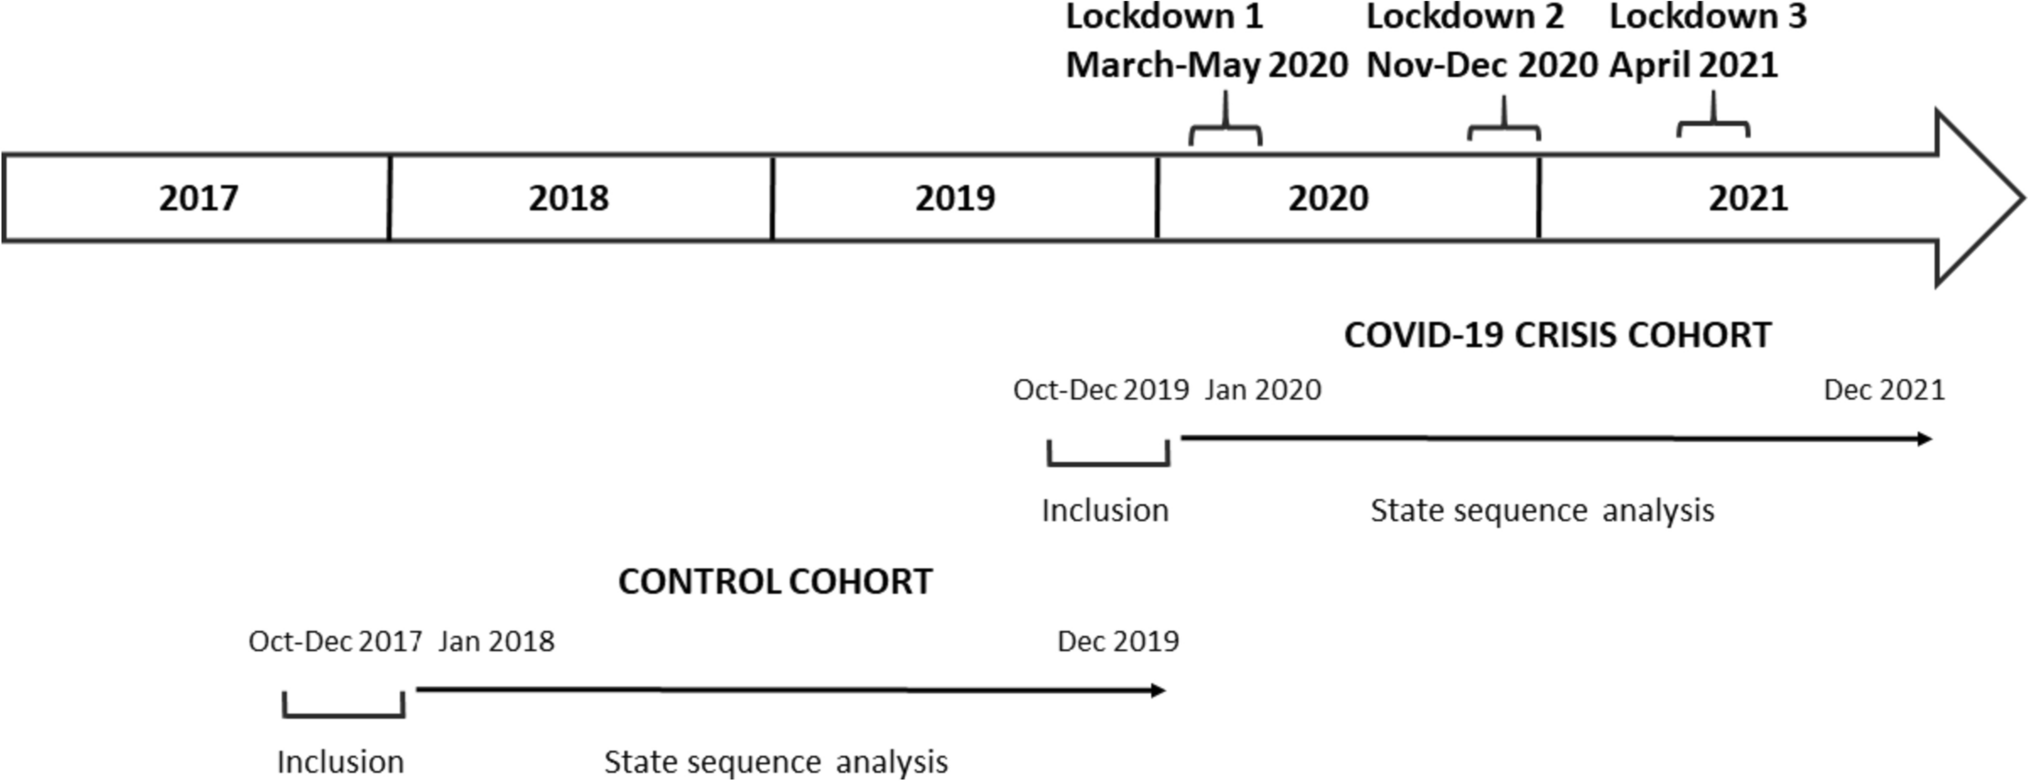 Evolution of the profiles of new psychotropic drug users before and during the COVID-19 crisis: an original longitudinal approach through multichannel sequence analysis using the French health-care database